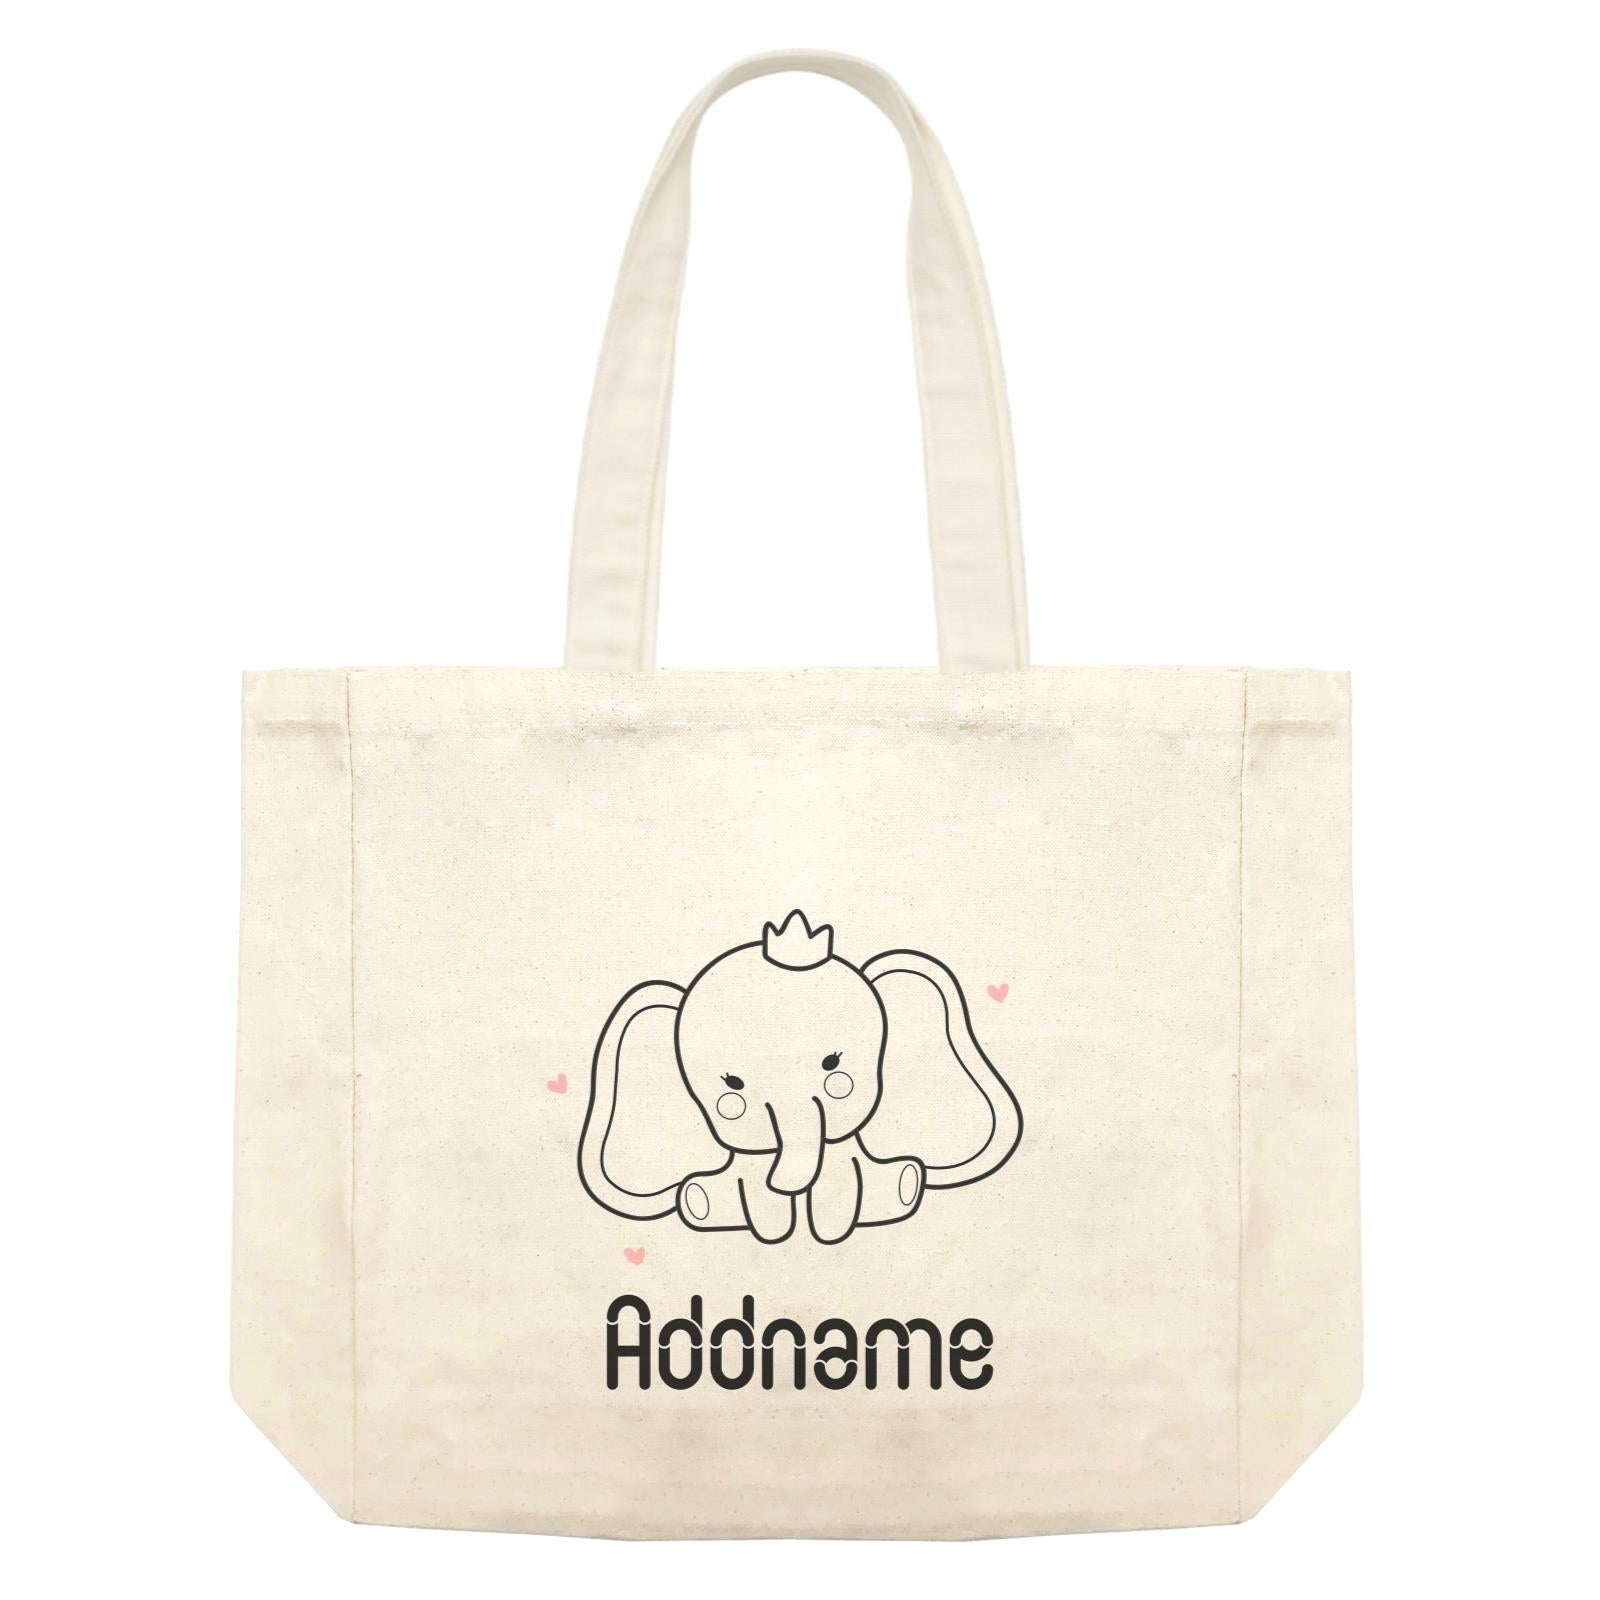 Coloring Outline Cute Hand Drawn Animals Elephants Baby Elephants With Crown Addname Shopping Bag